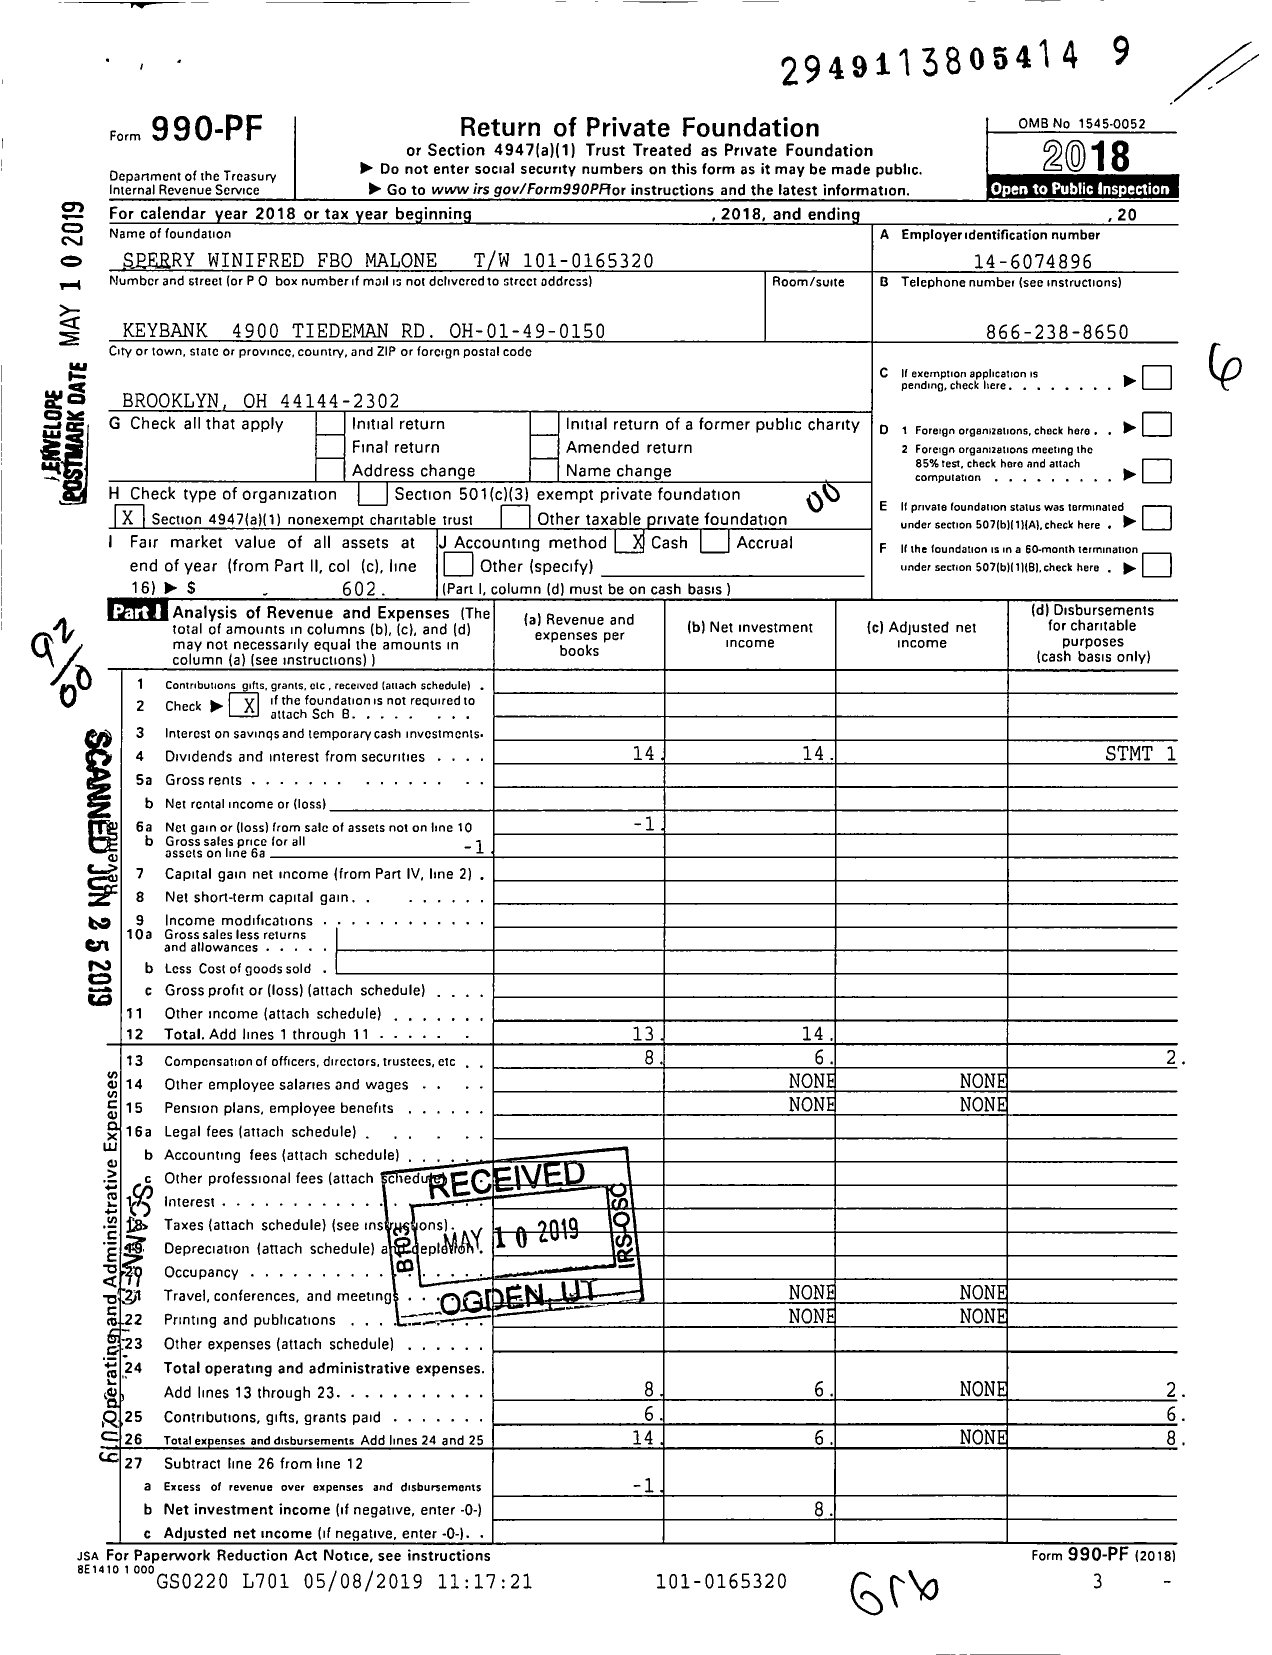 Image of first page of 2018 Form 990PF for Sperry Winifred Fbo Malone TW